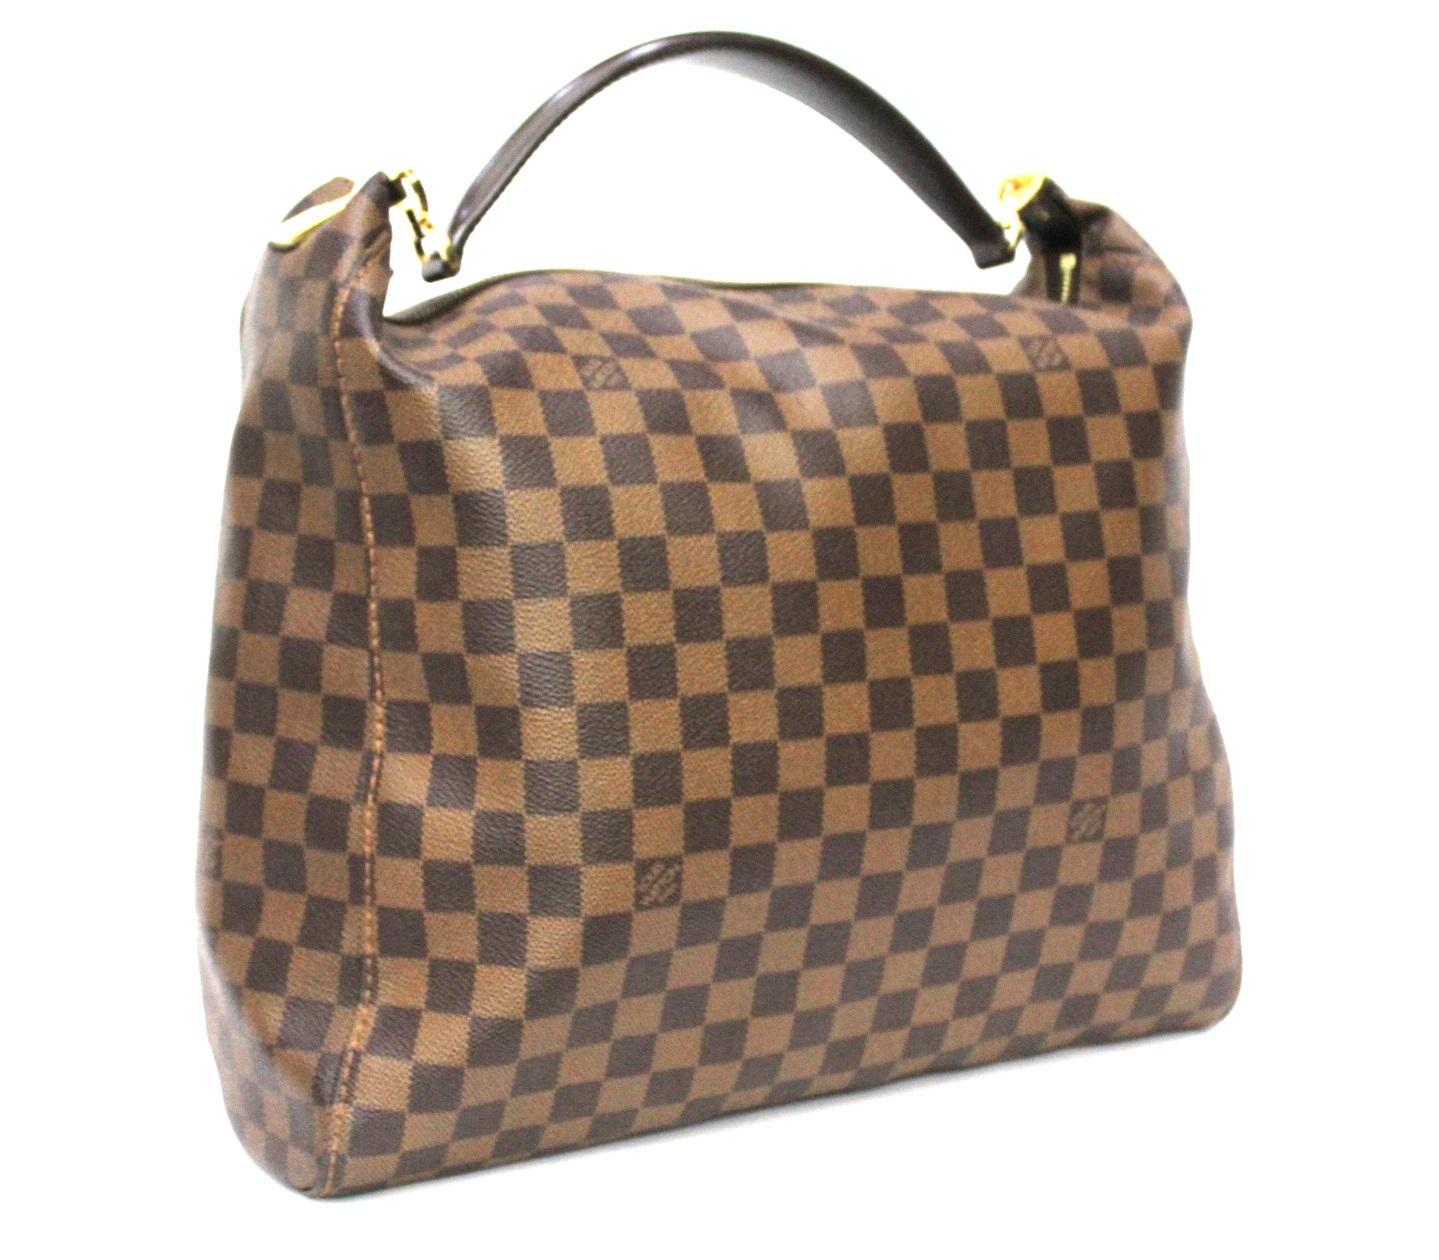 is Vuitton Portobello model made of damir ebene with golden hardware.
Zip closure, very large inside. Equipped with upper leather handle.
The bag is in excellent condition.